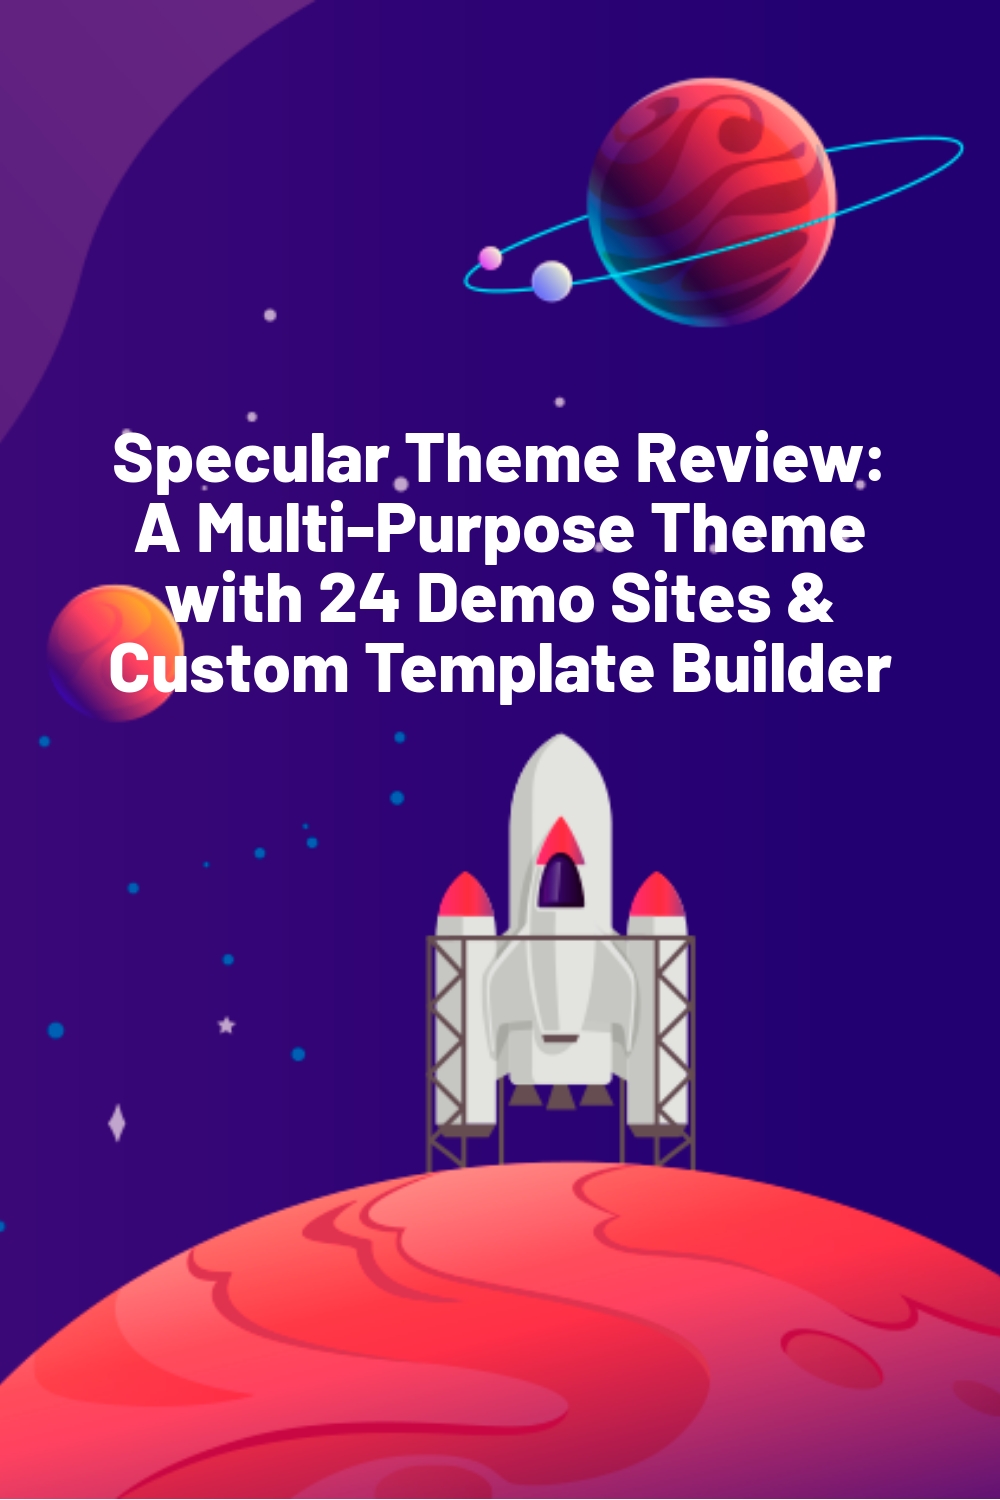 Specular Theme Review: A Multi-Purpose Theme with 24 Demo Sites & Custom Template Builder